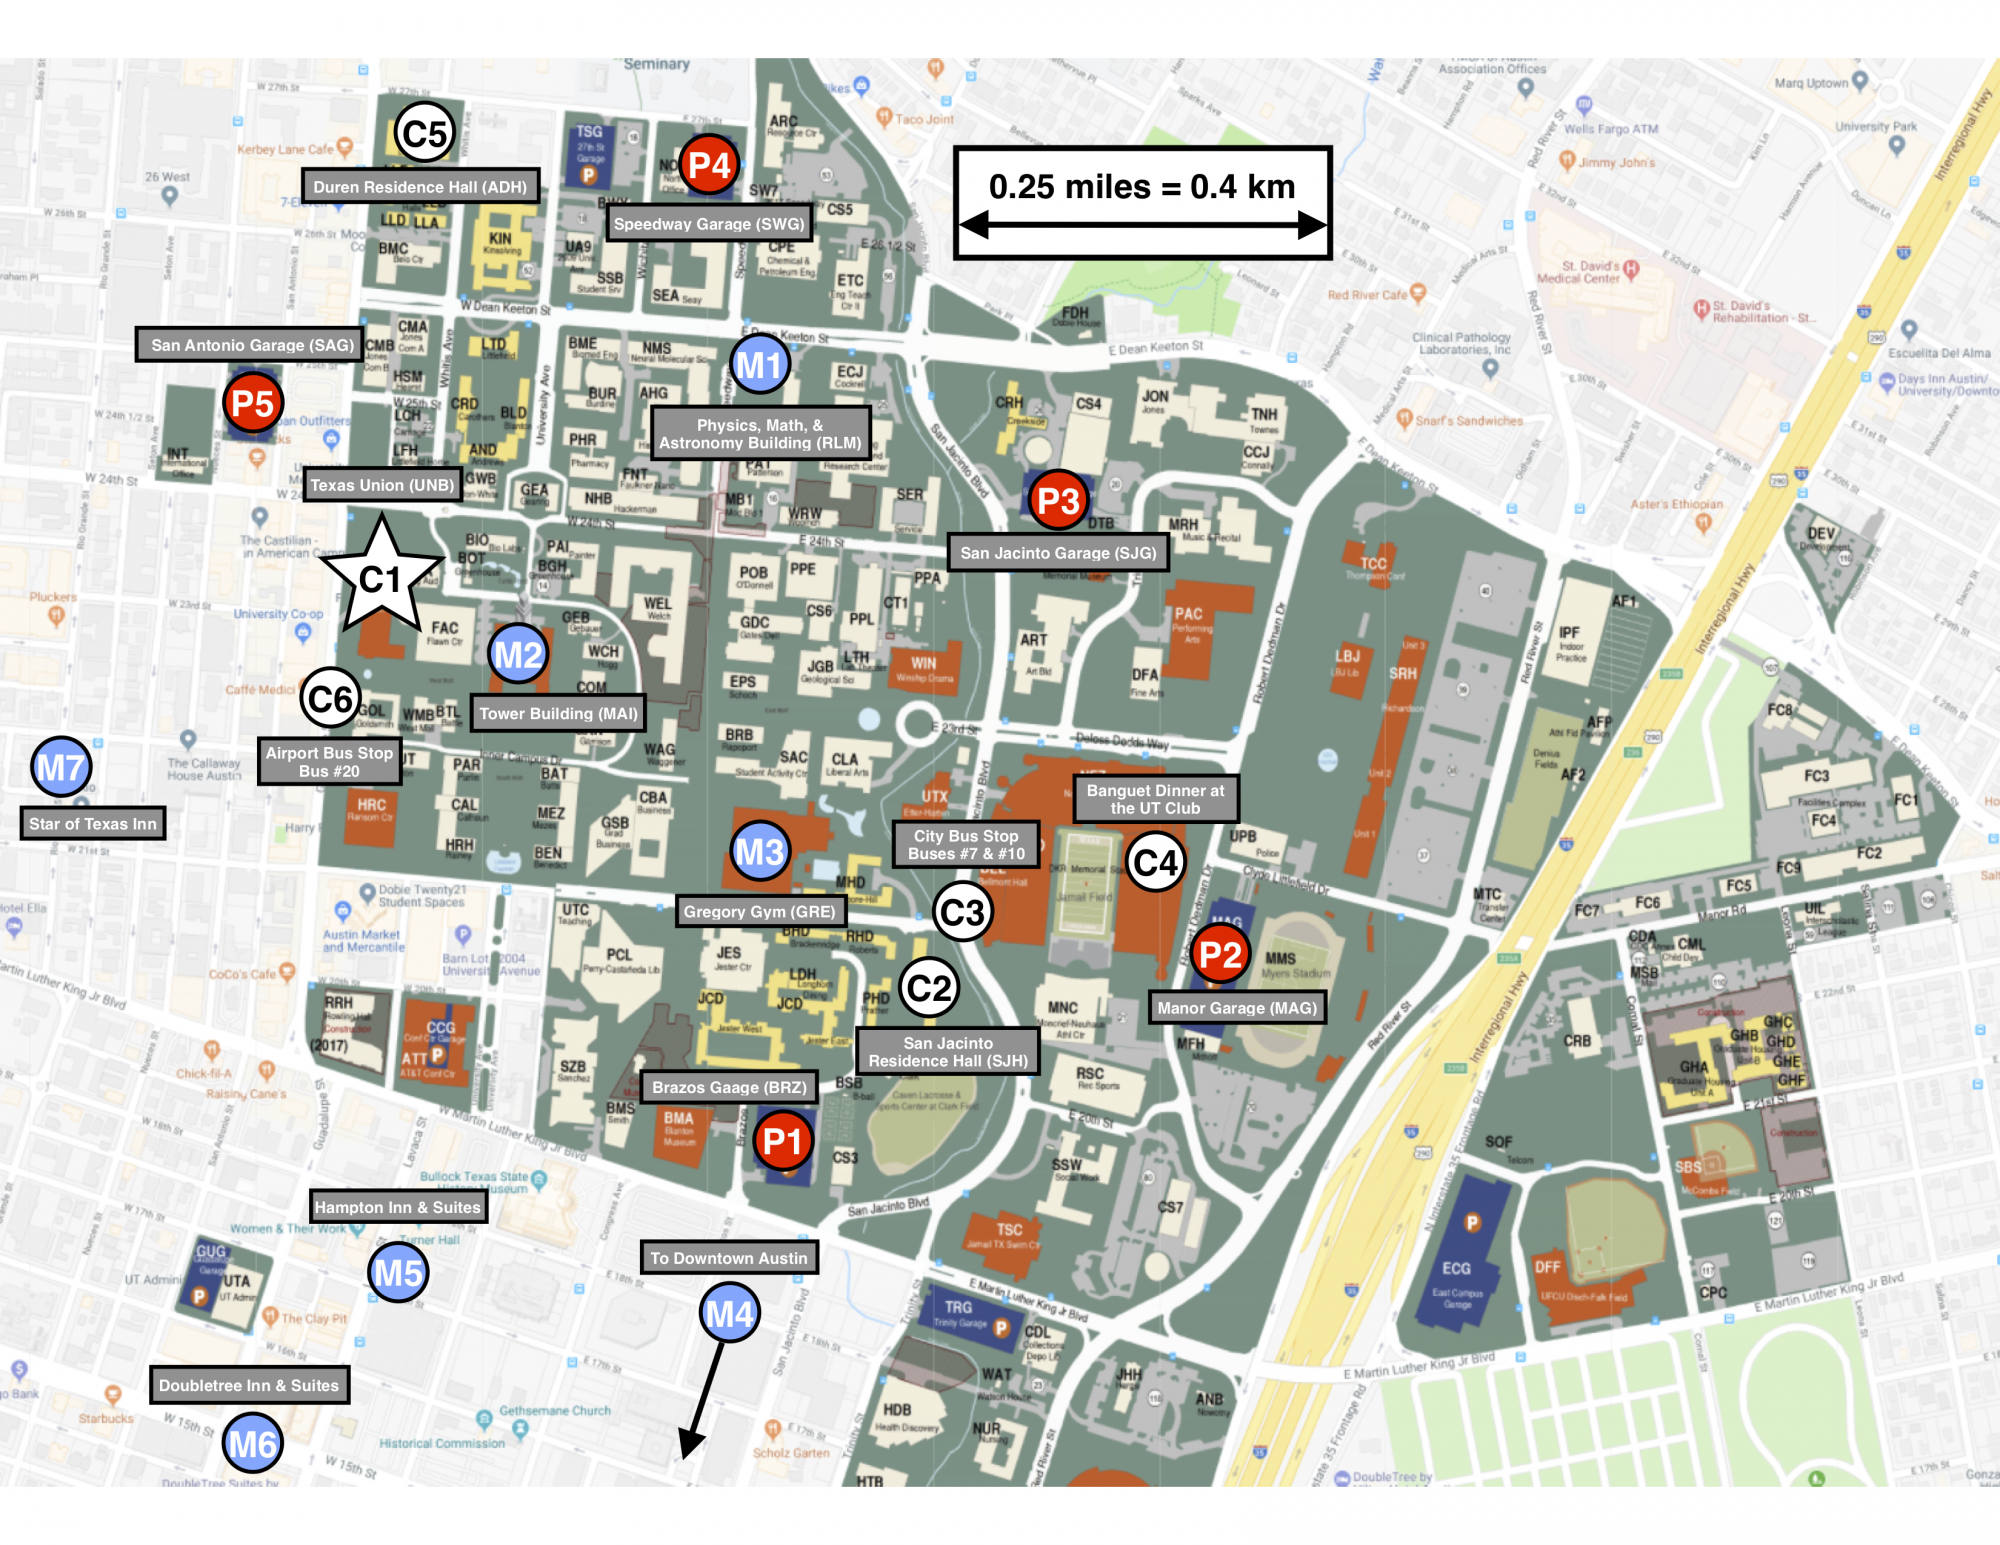 Univ Of Texas Campus Map - United States Map